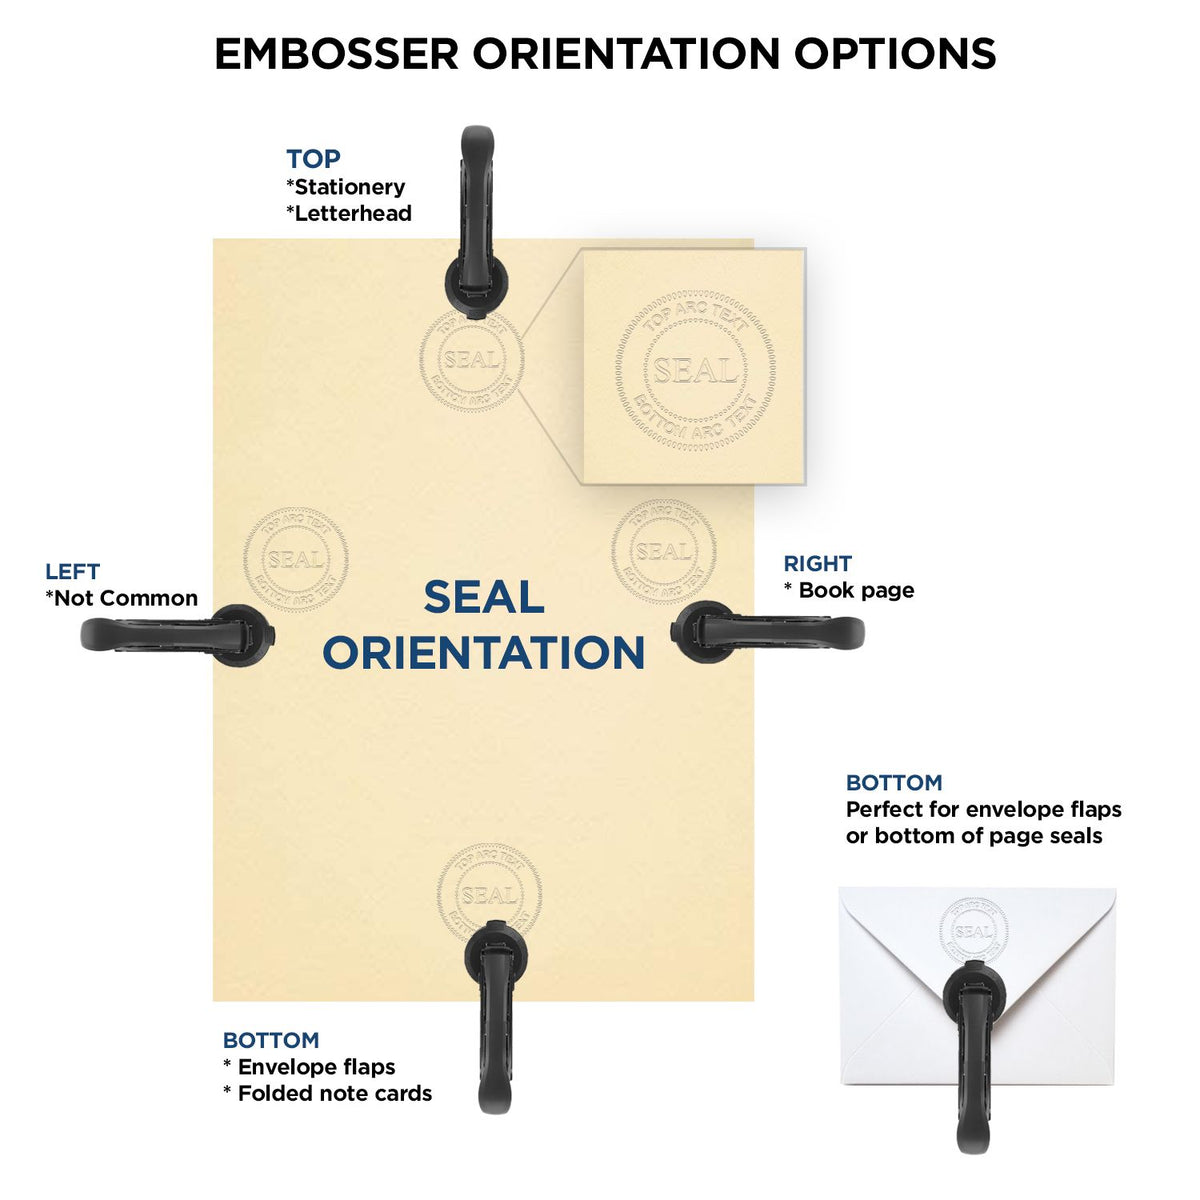 An infographic for the Heavy Duty Cast Iron Kentucky Engineer Seal Embosser showing embosser orientation, this is showing examples of a top, bottom, right and left insert.